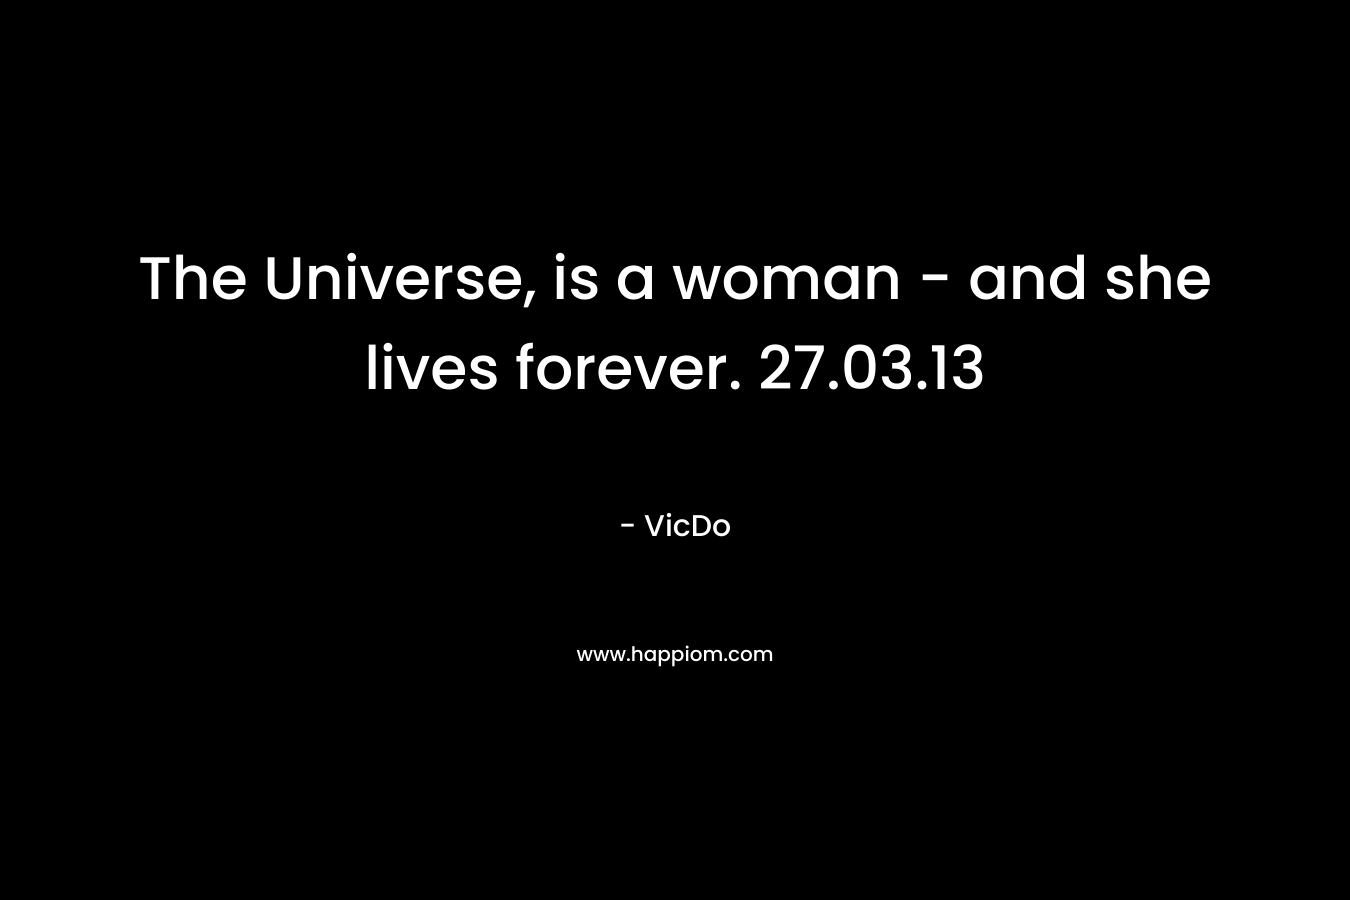 The Universe, is a woman - and she lives forever.  27.03.13